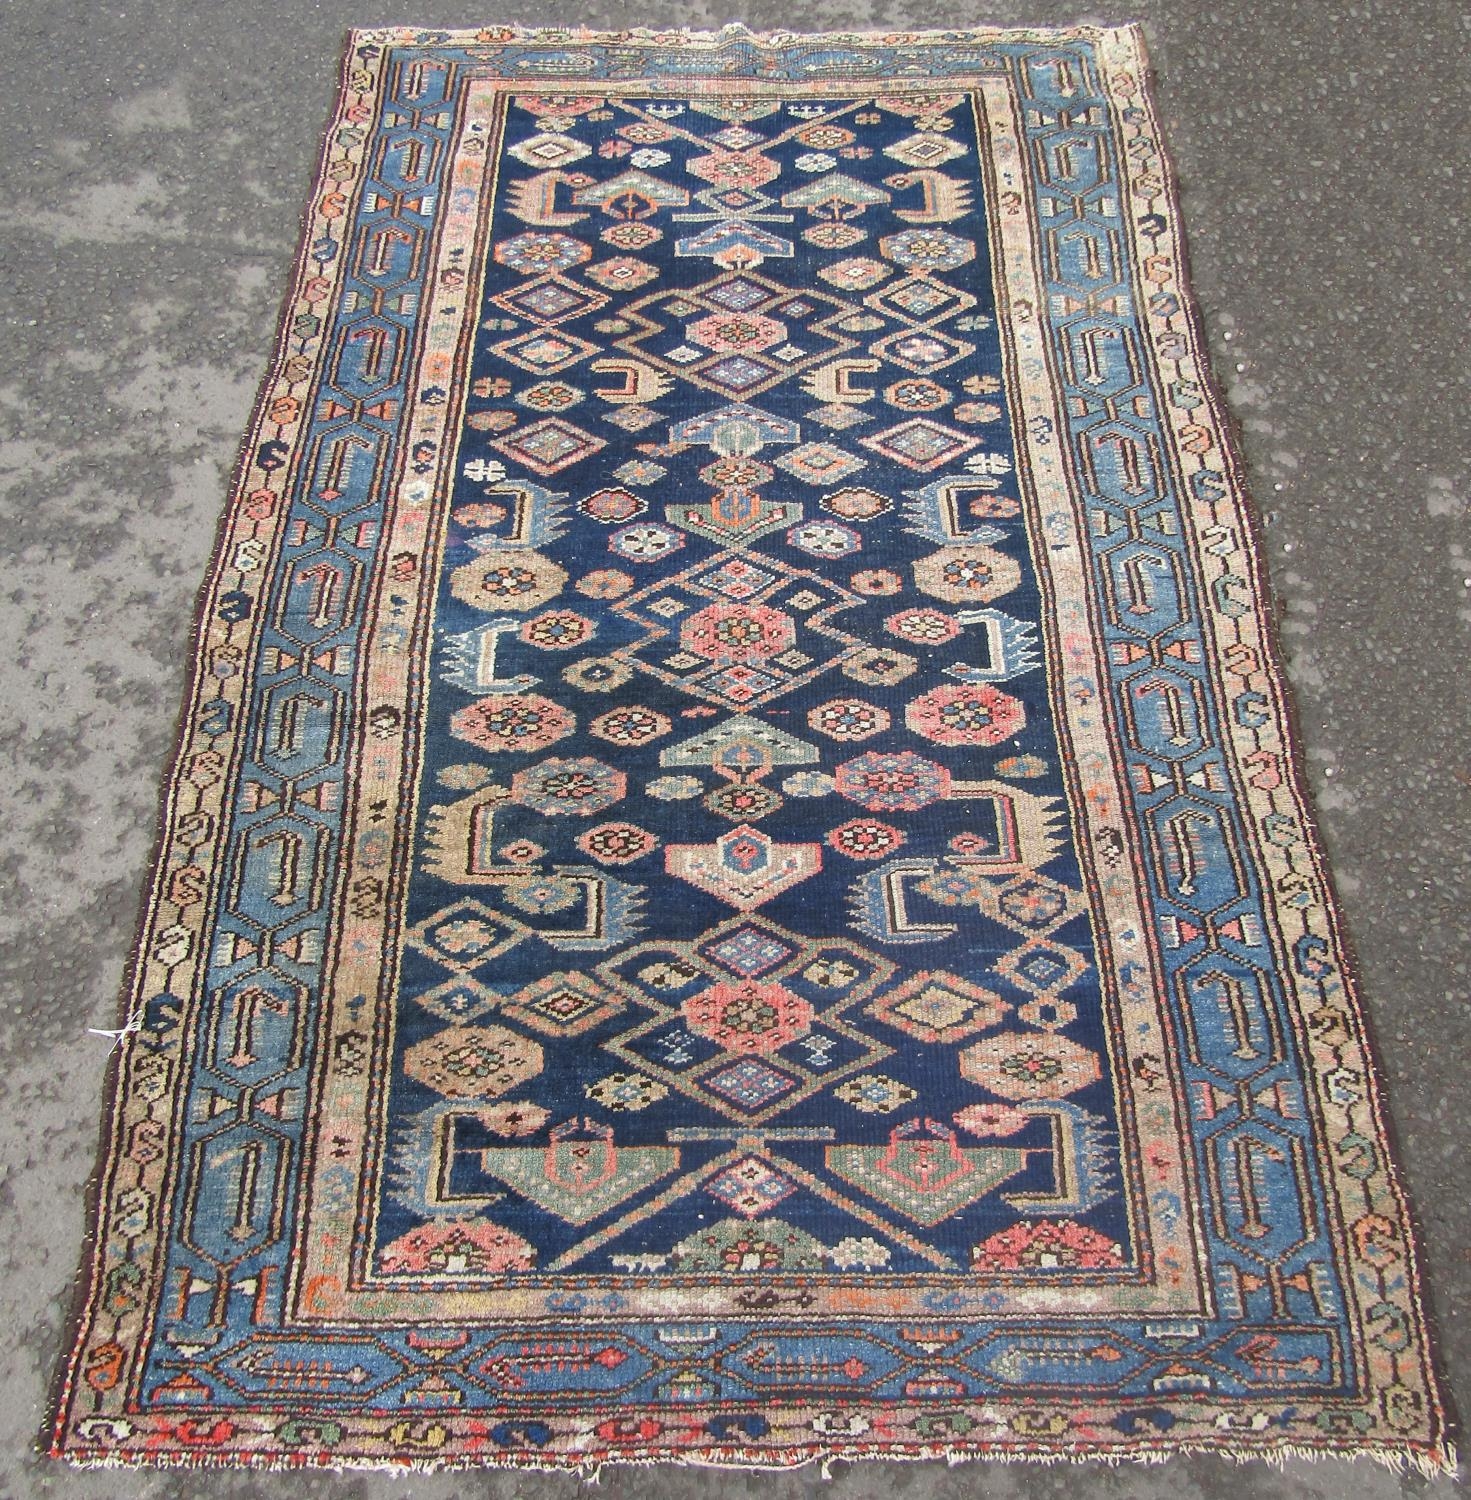 An old Malayer carpet with a repeating geometric pattern on a blue ground